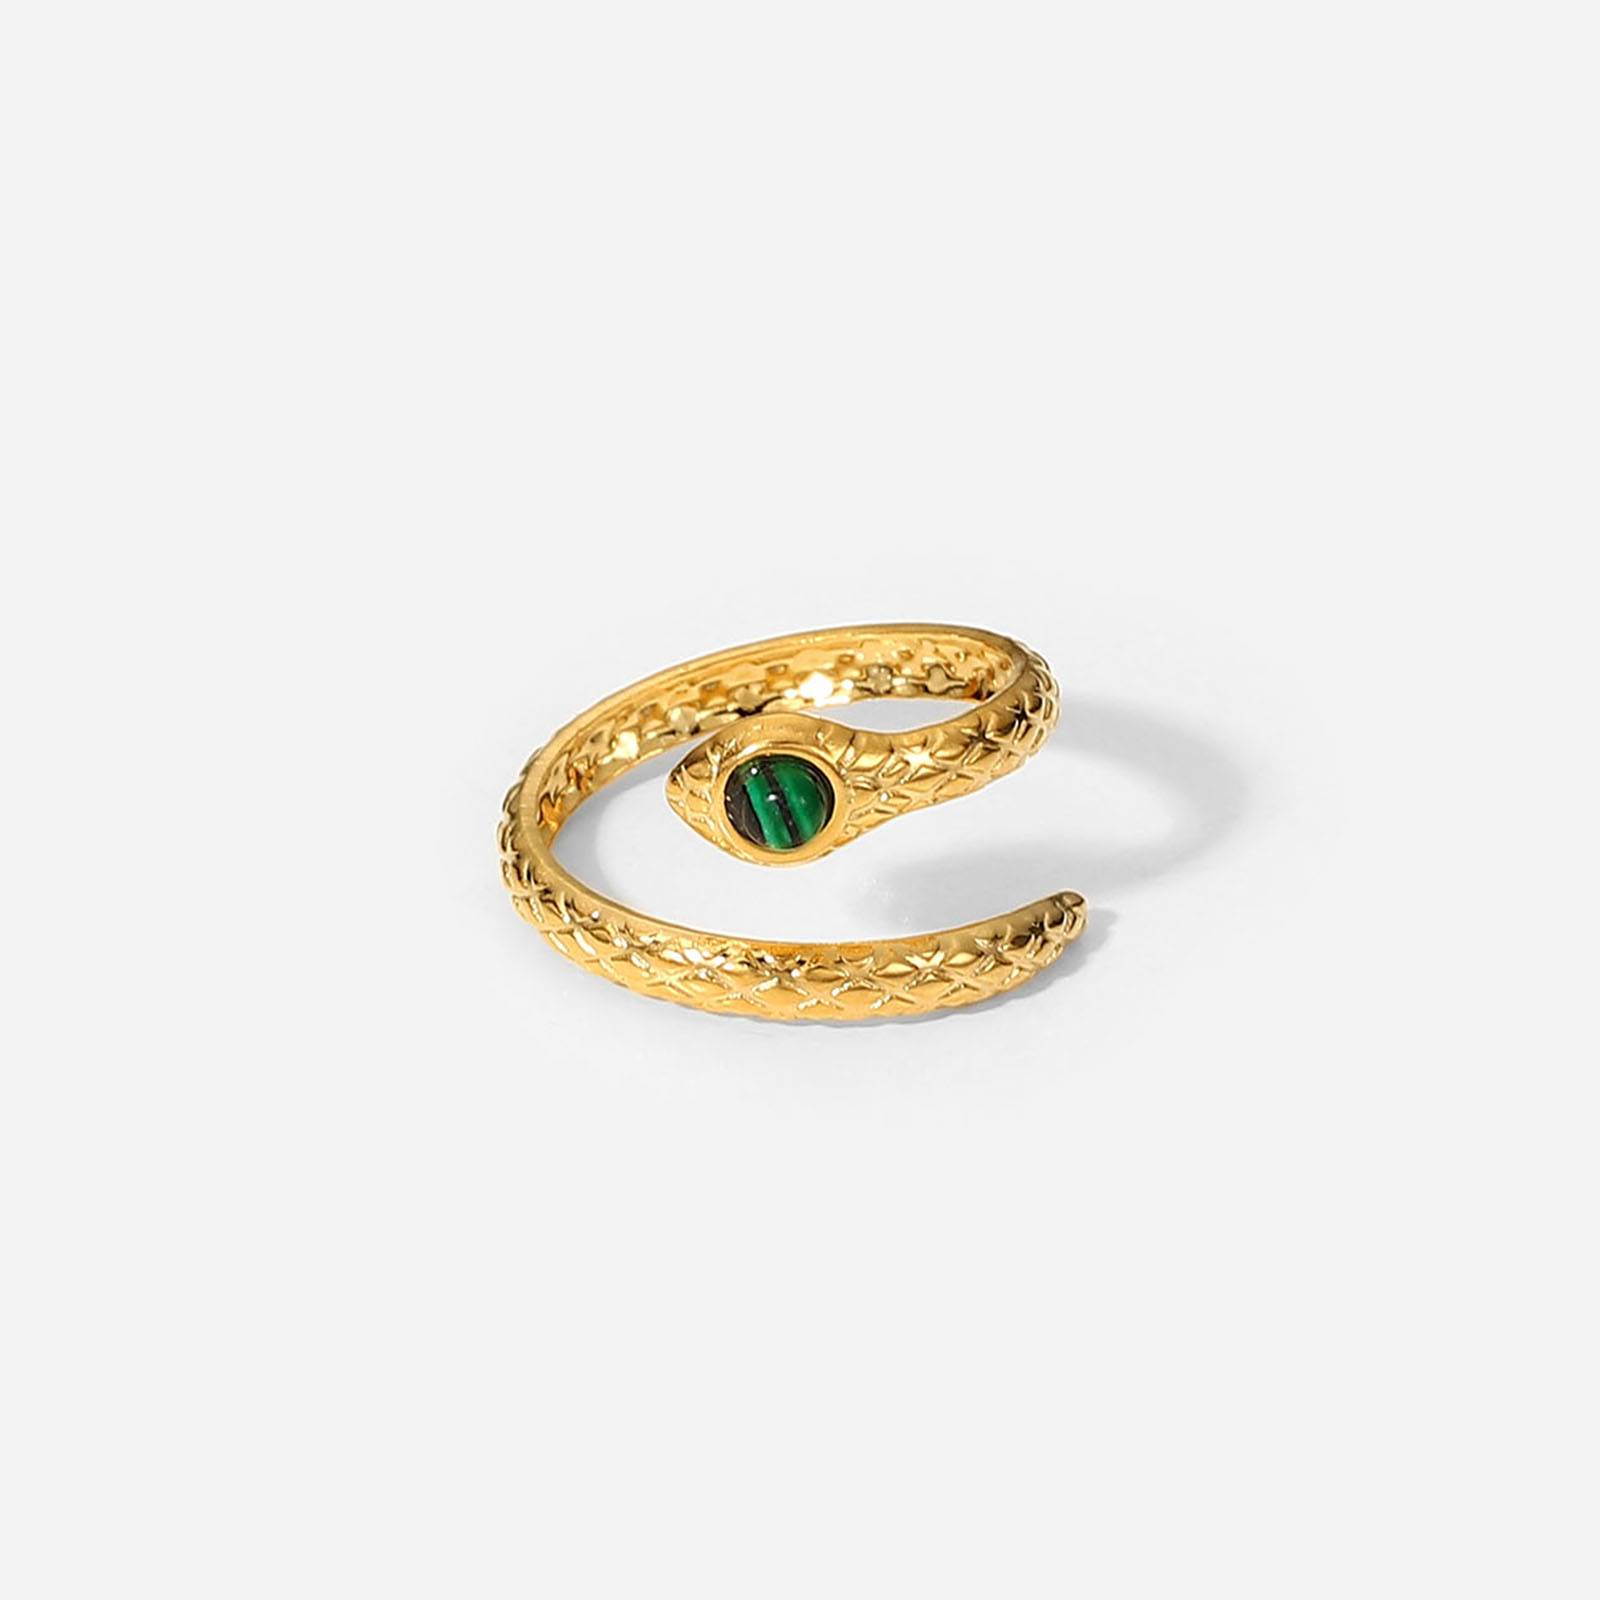 New Chunky Snake Stainless Steel Ring With Malachite Cobra Green Stone Waterproof 18k Gold PVD Adjustable Open Rings Women Party